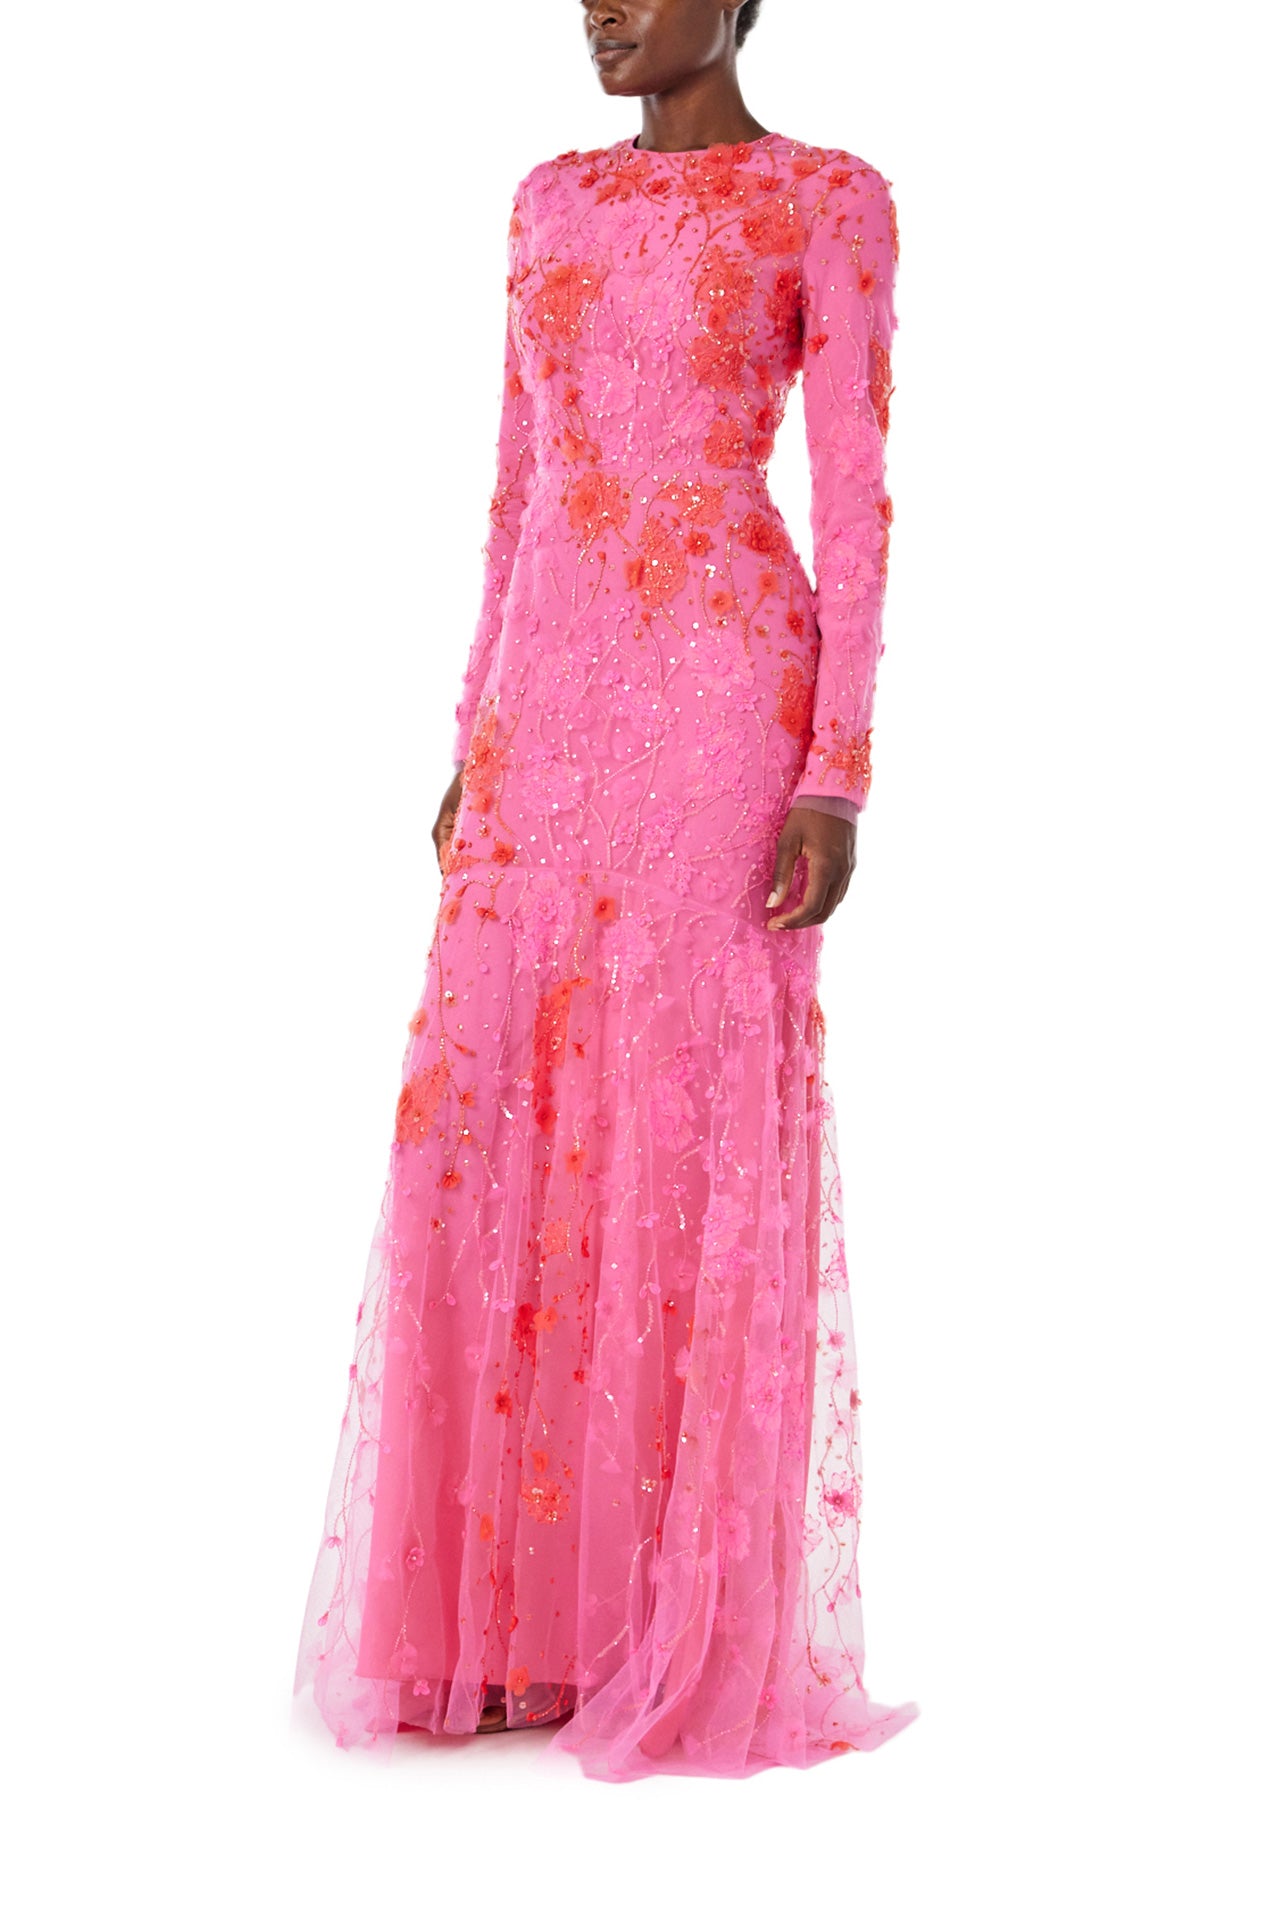 Monique Lhuillier Spring 2024 long sleeve gown in raspberry red embroidery - side.